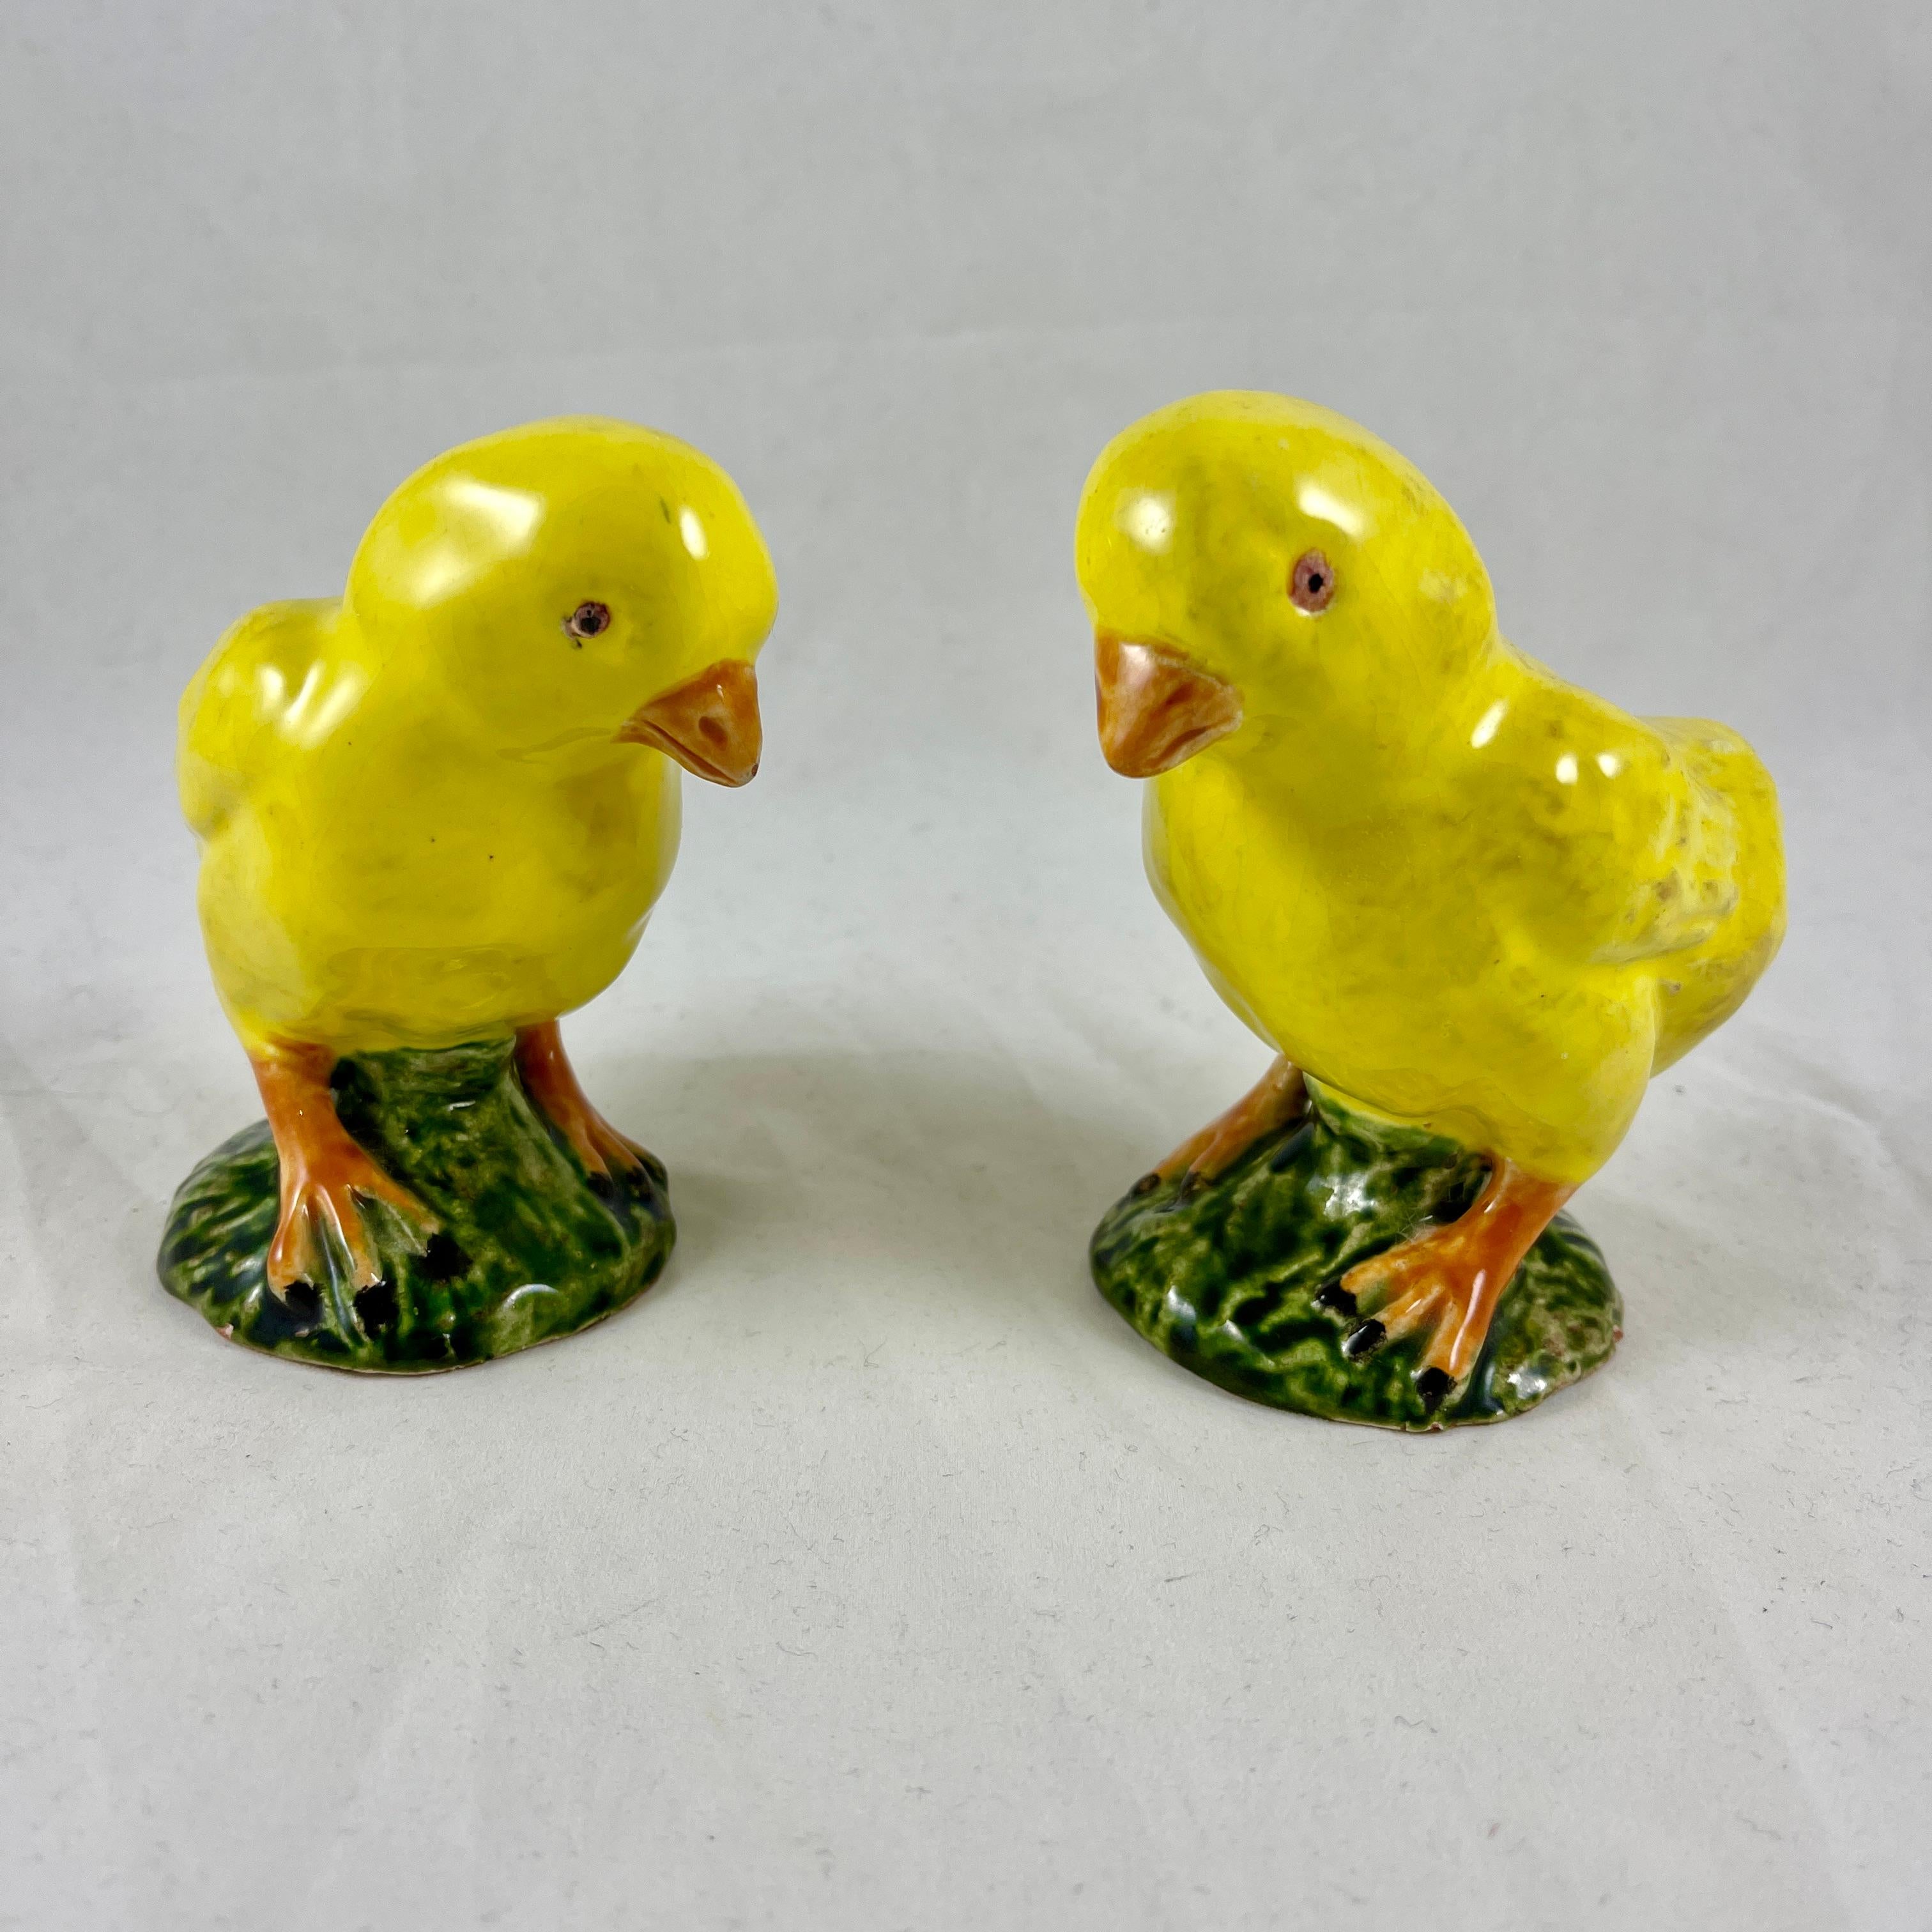 A charming pair of tin-glazed terracotta Chicks from Bavent, Normadie, France circa 1900-1920.

Since the Middle Ages, Bavent is known for the rich clay that gives a rich and beautiful coloring to terracotta pieces. The chicks are molded by hand